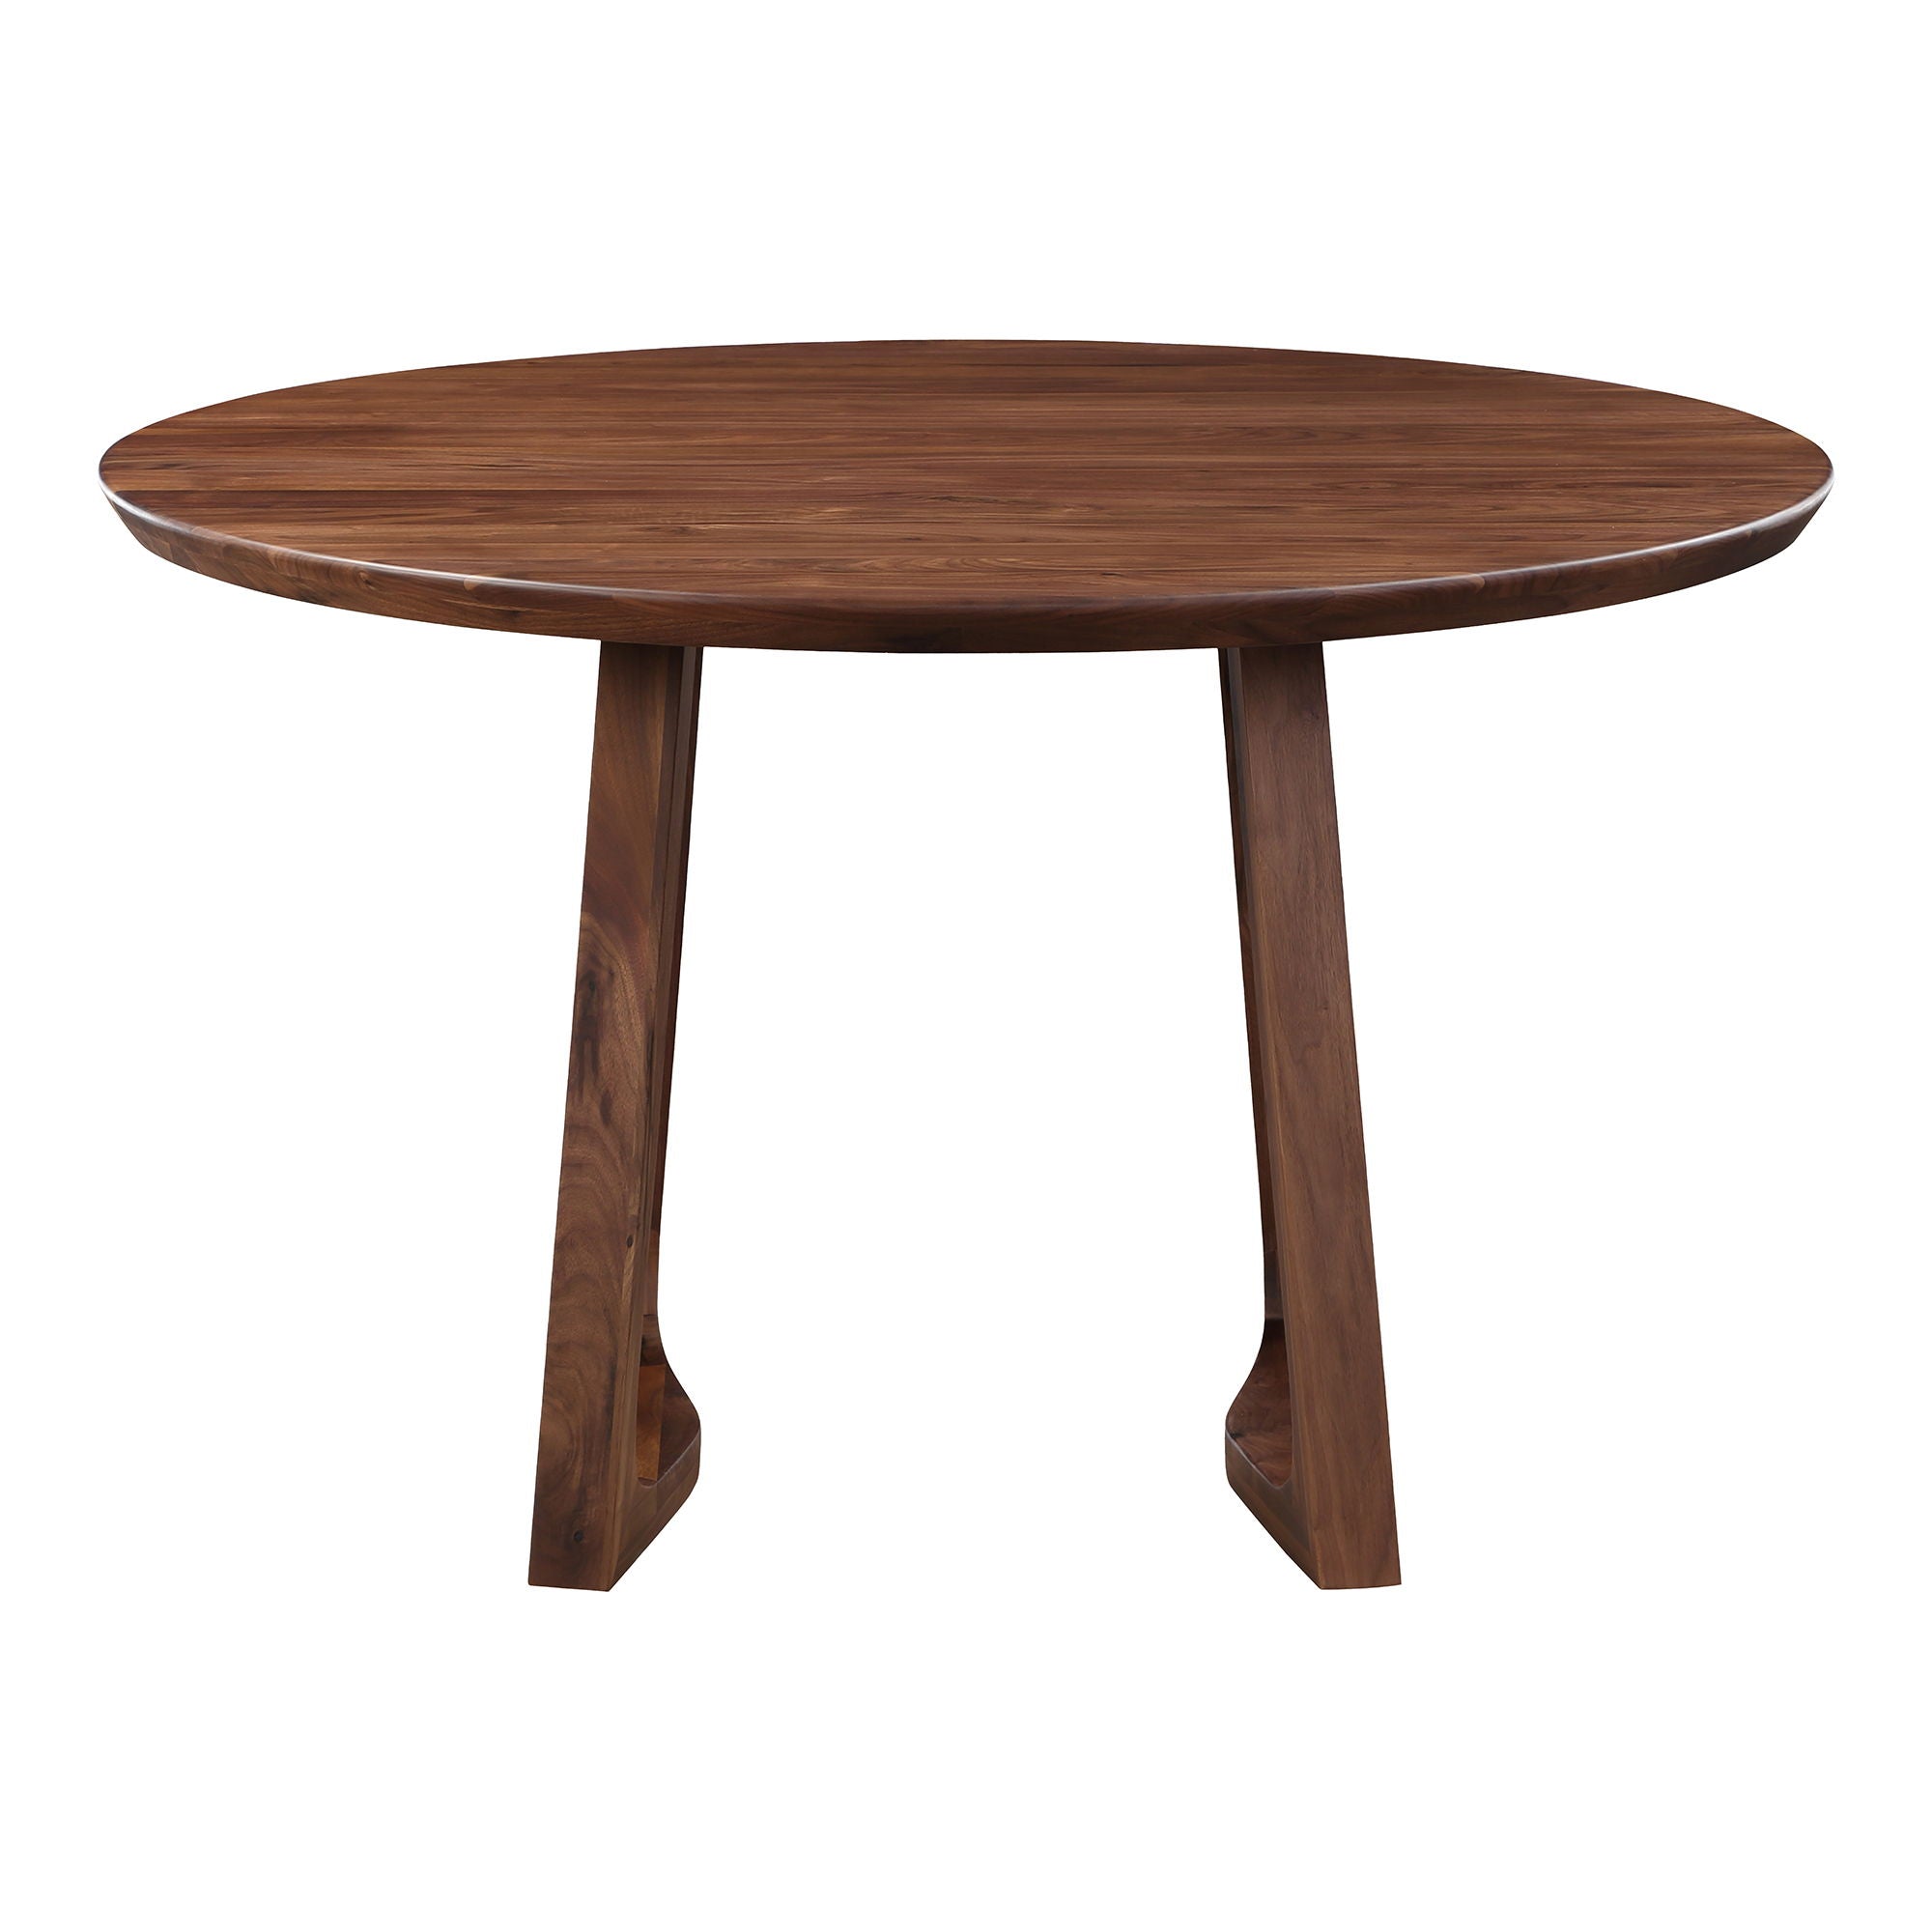 Silas - Round Dining Table - Natural